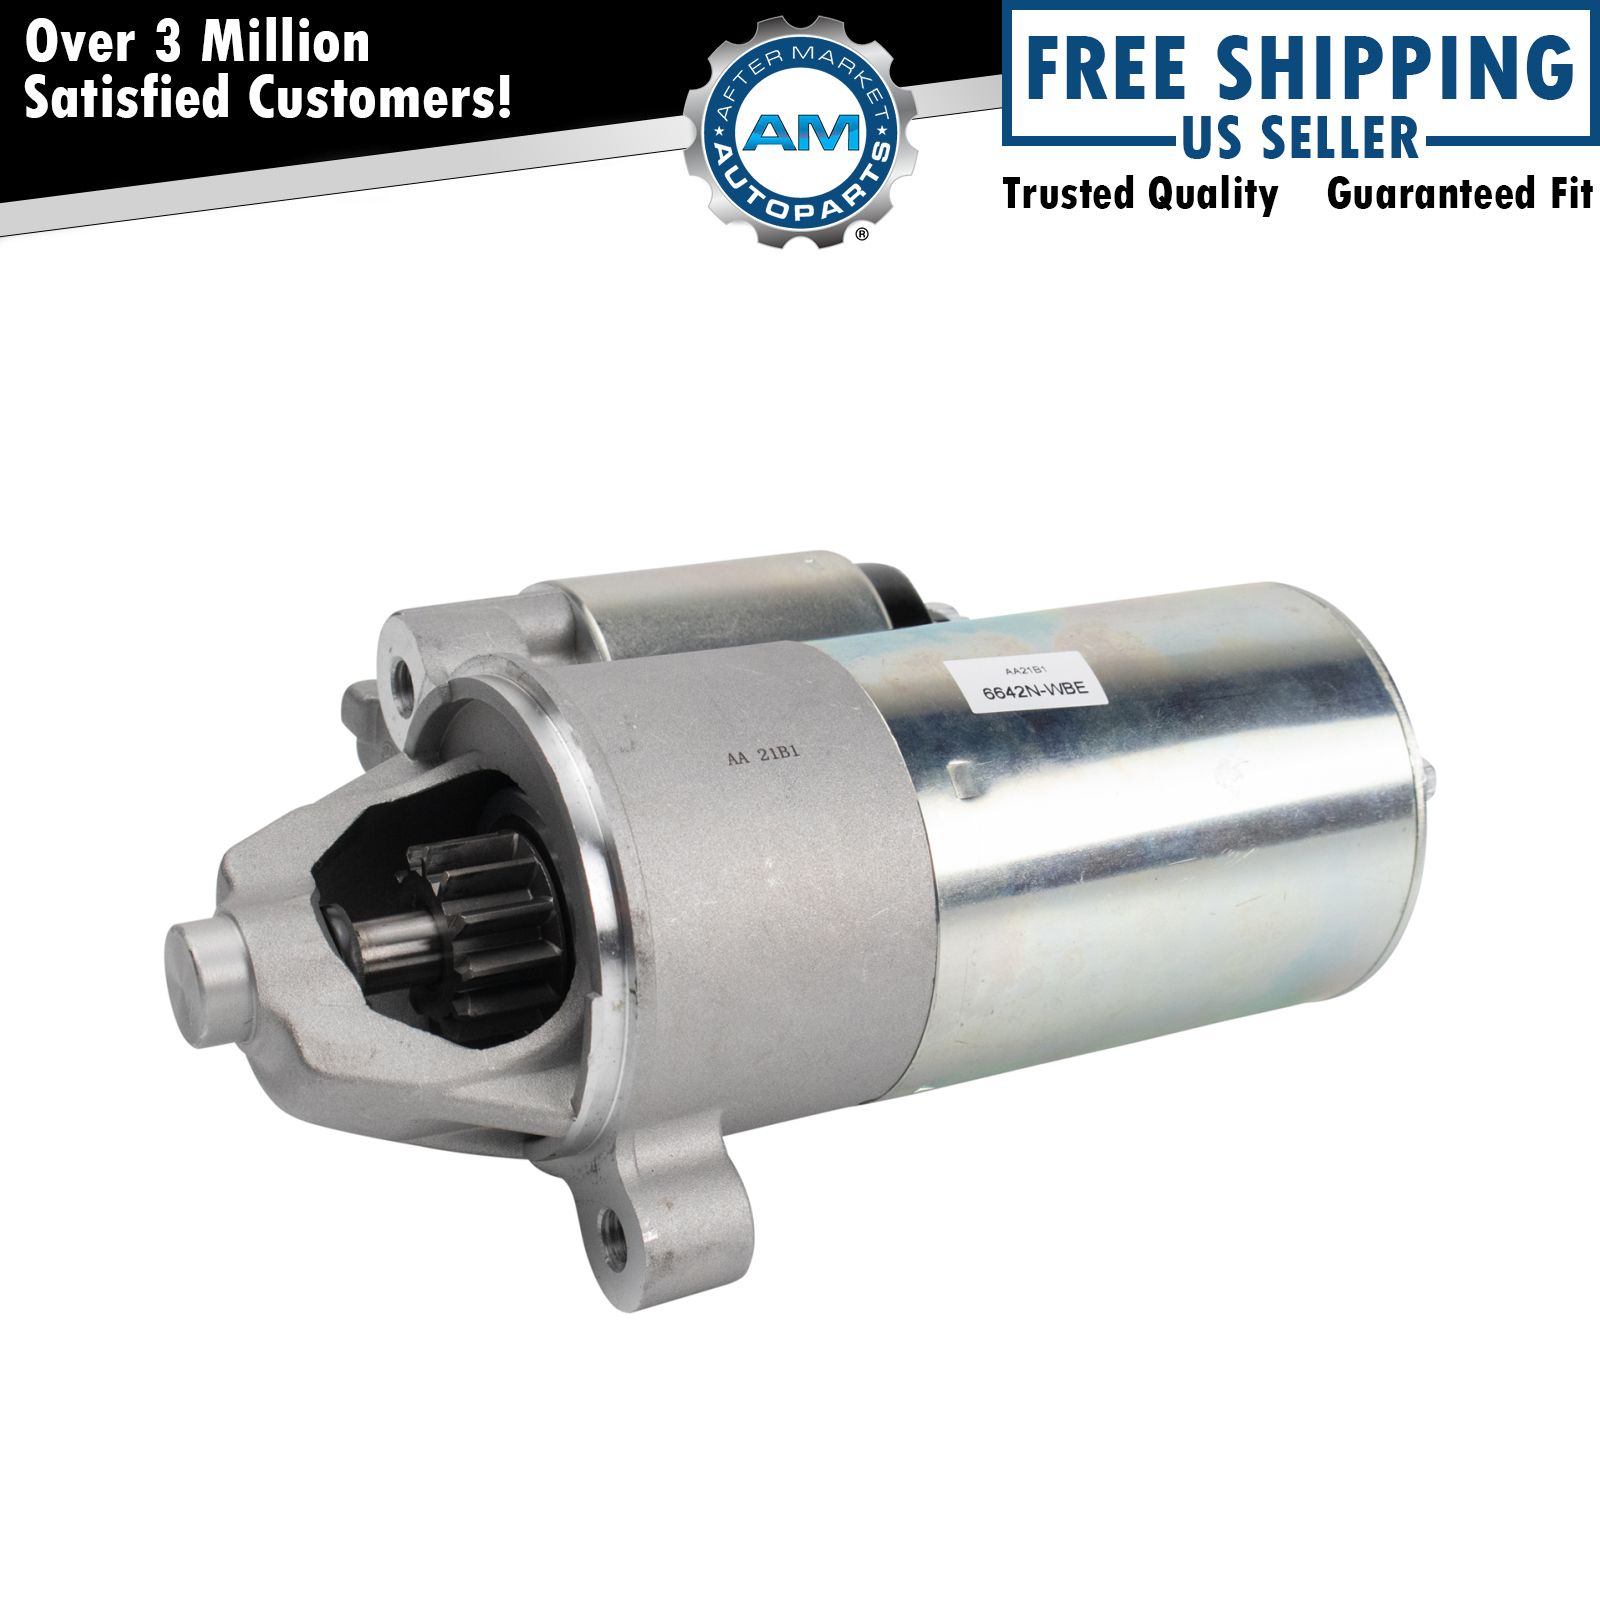 New Replacement Starter Motor for Ford Taurus Mercury Sable 3.0L